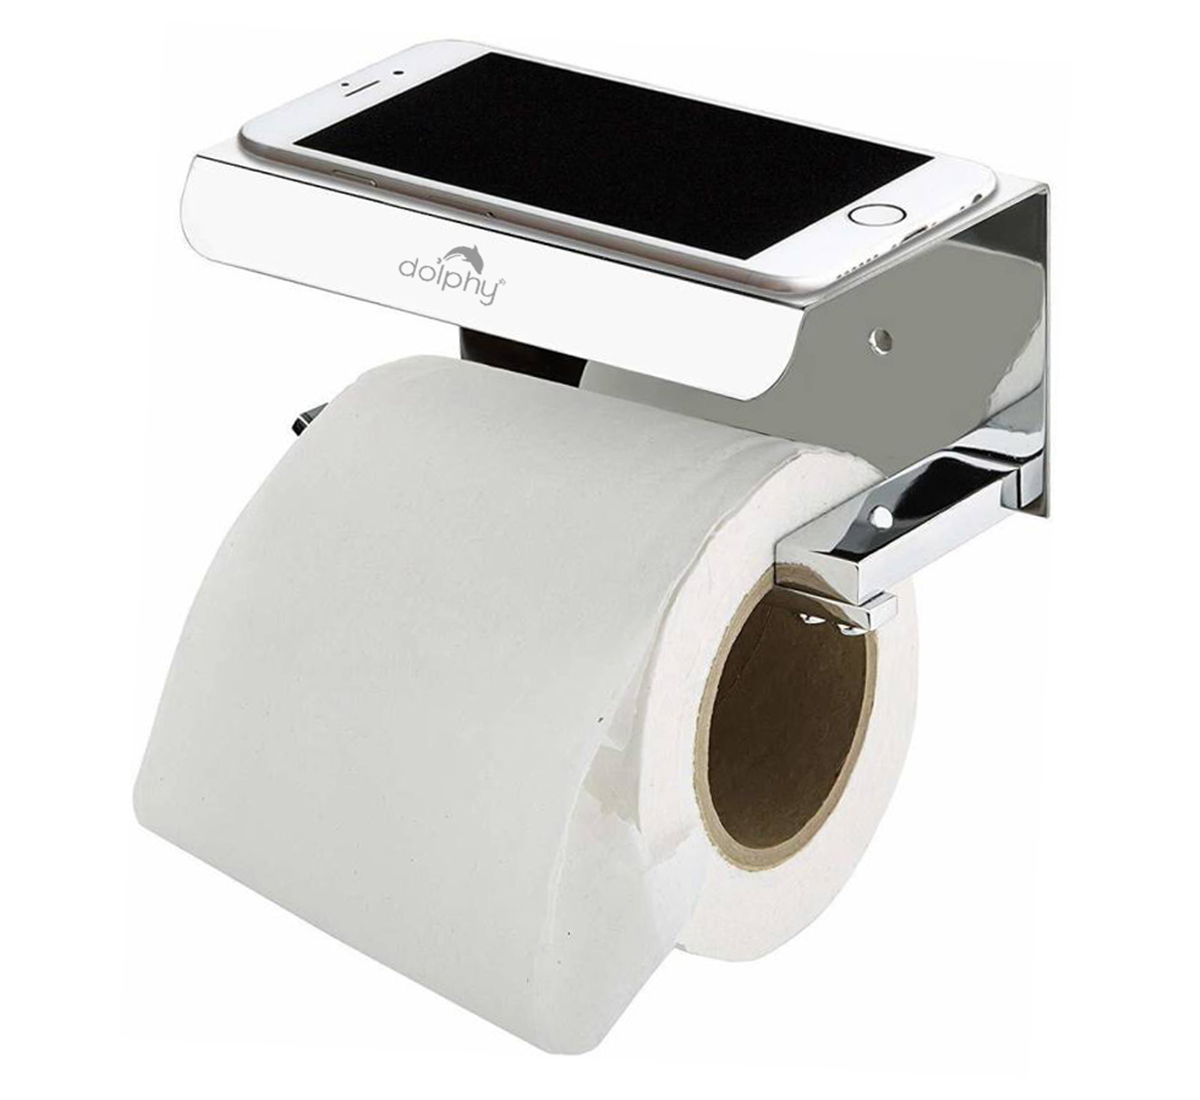 Silver toilet paper dispenser holder with mobile stand